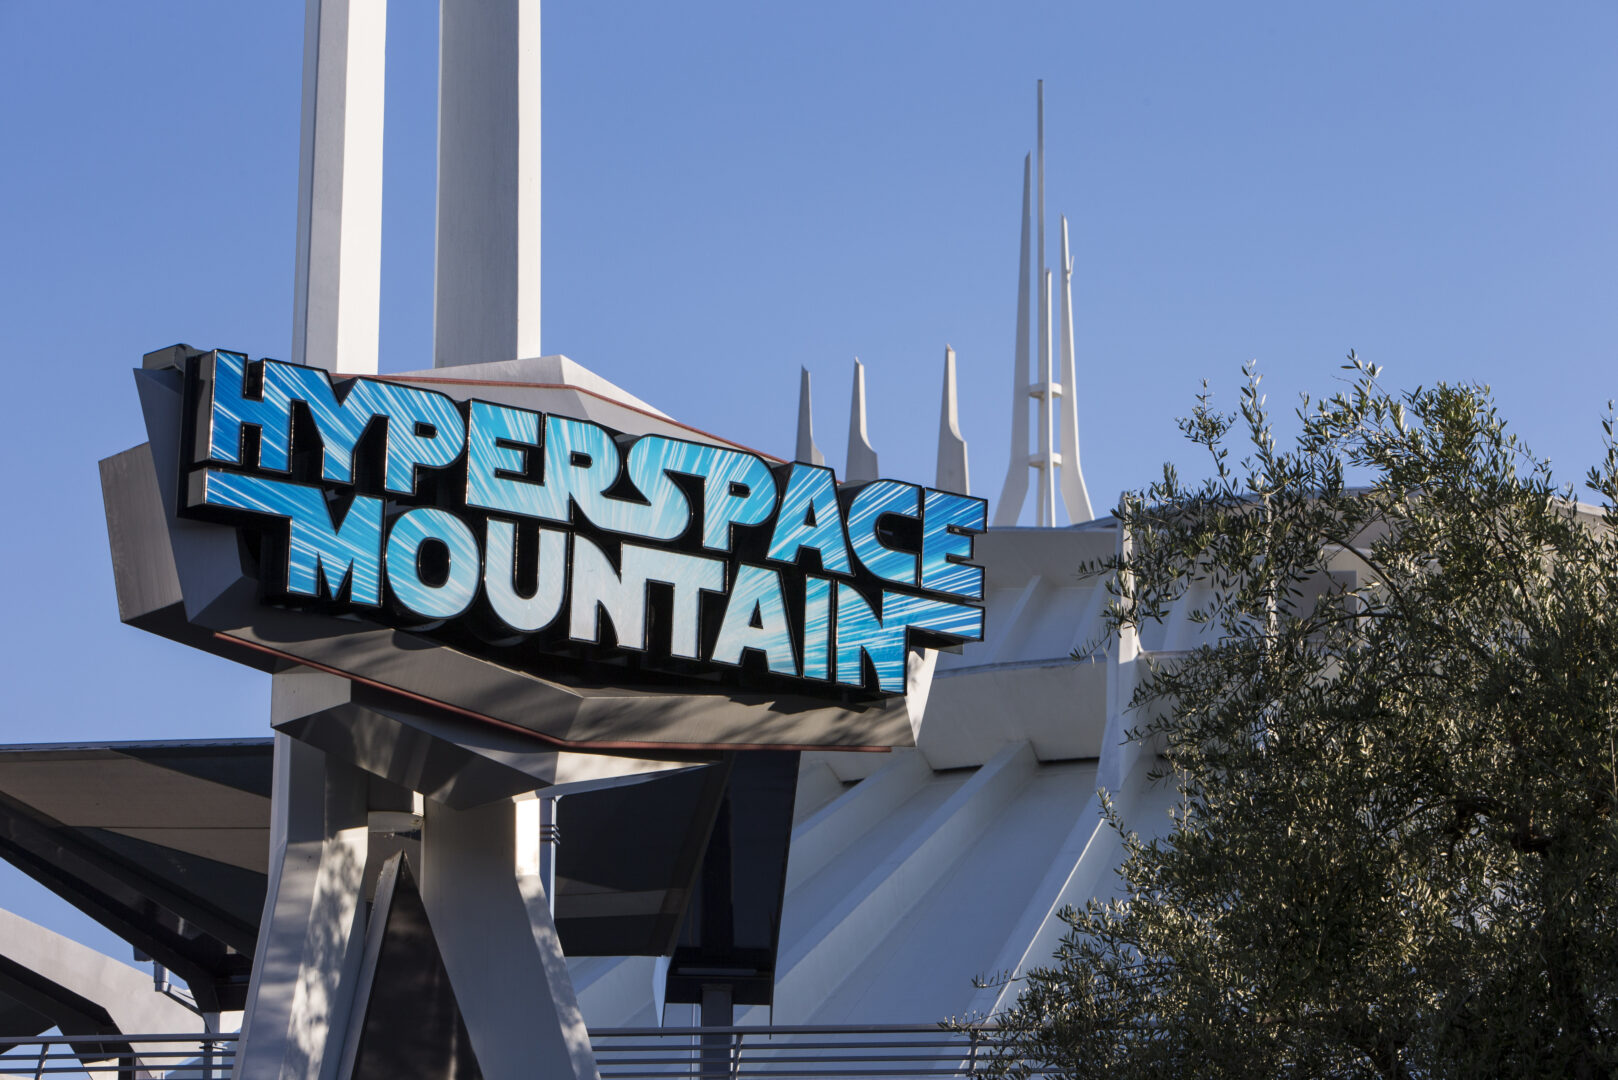 Hyperspace Mountain Returning to Disneyland for Star Wars Month this May